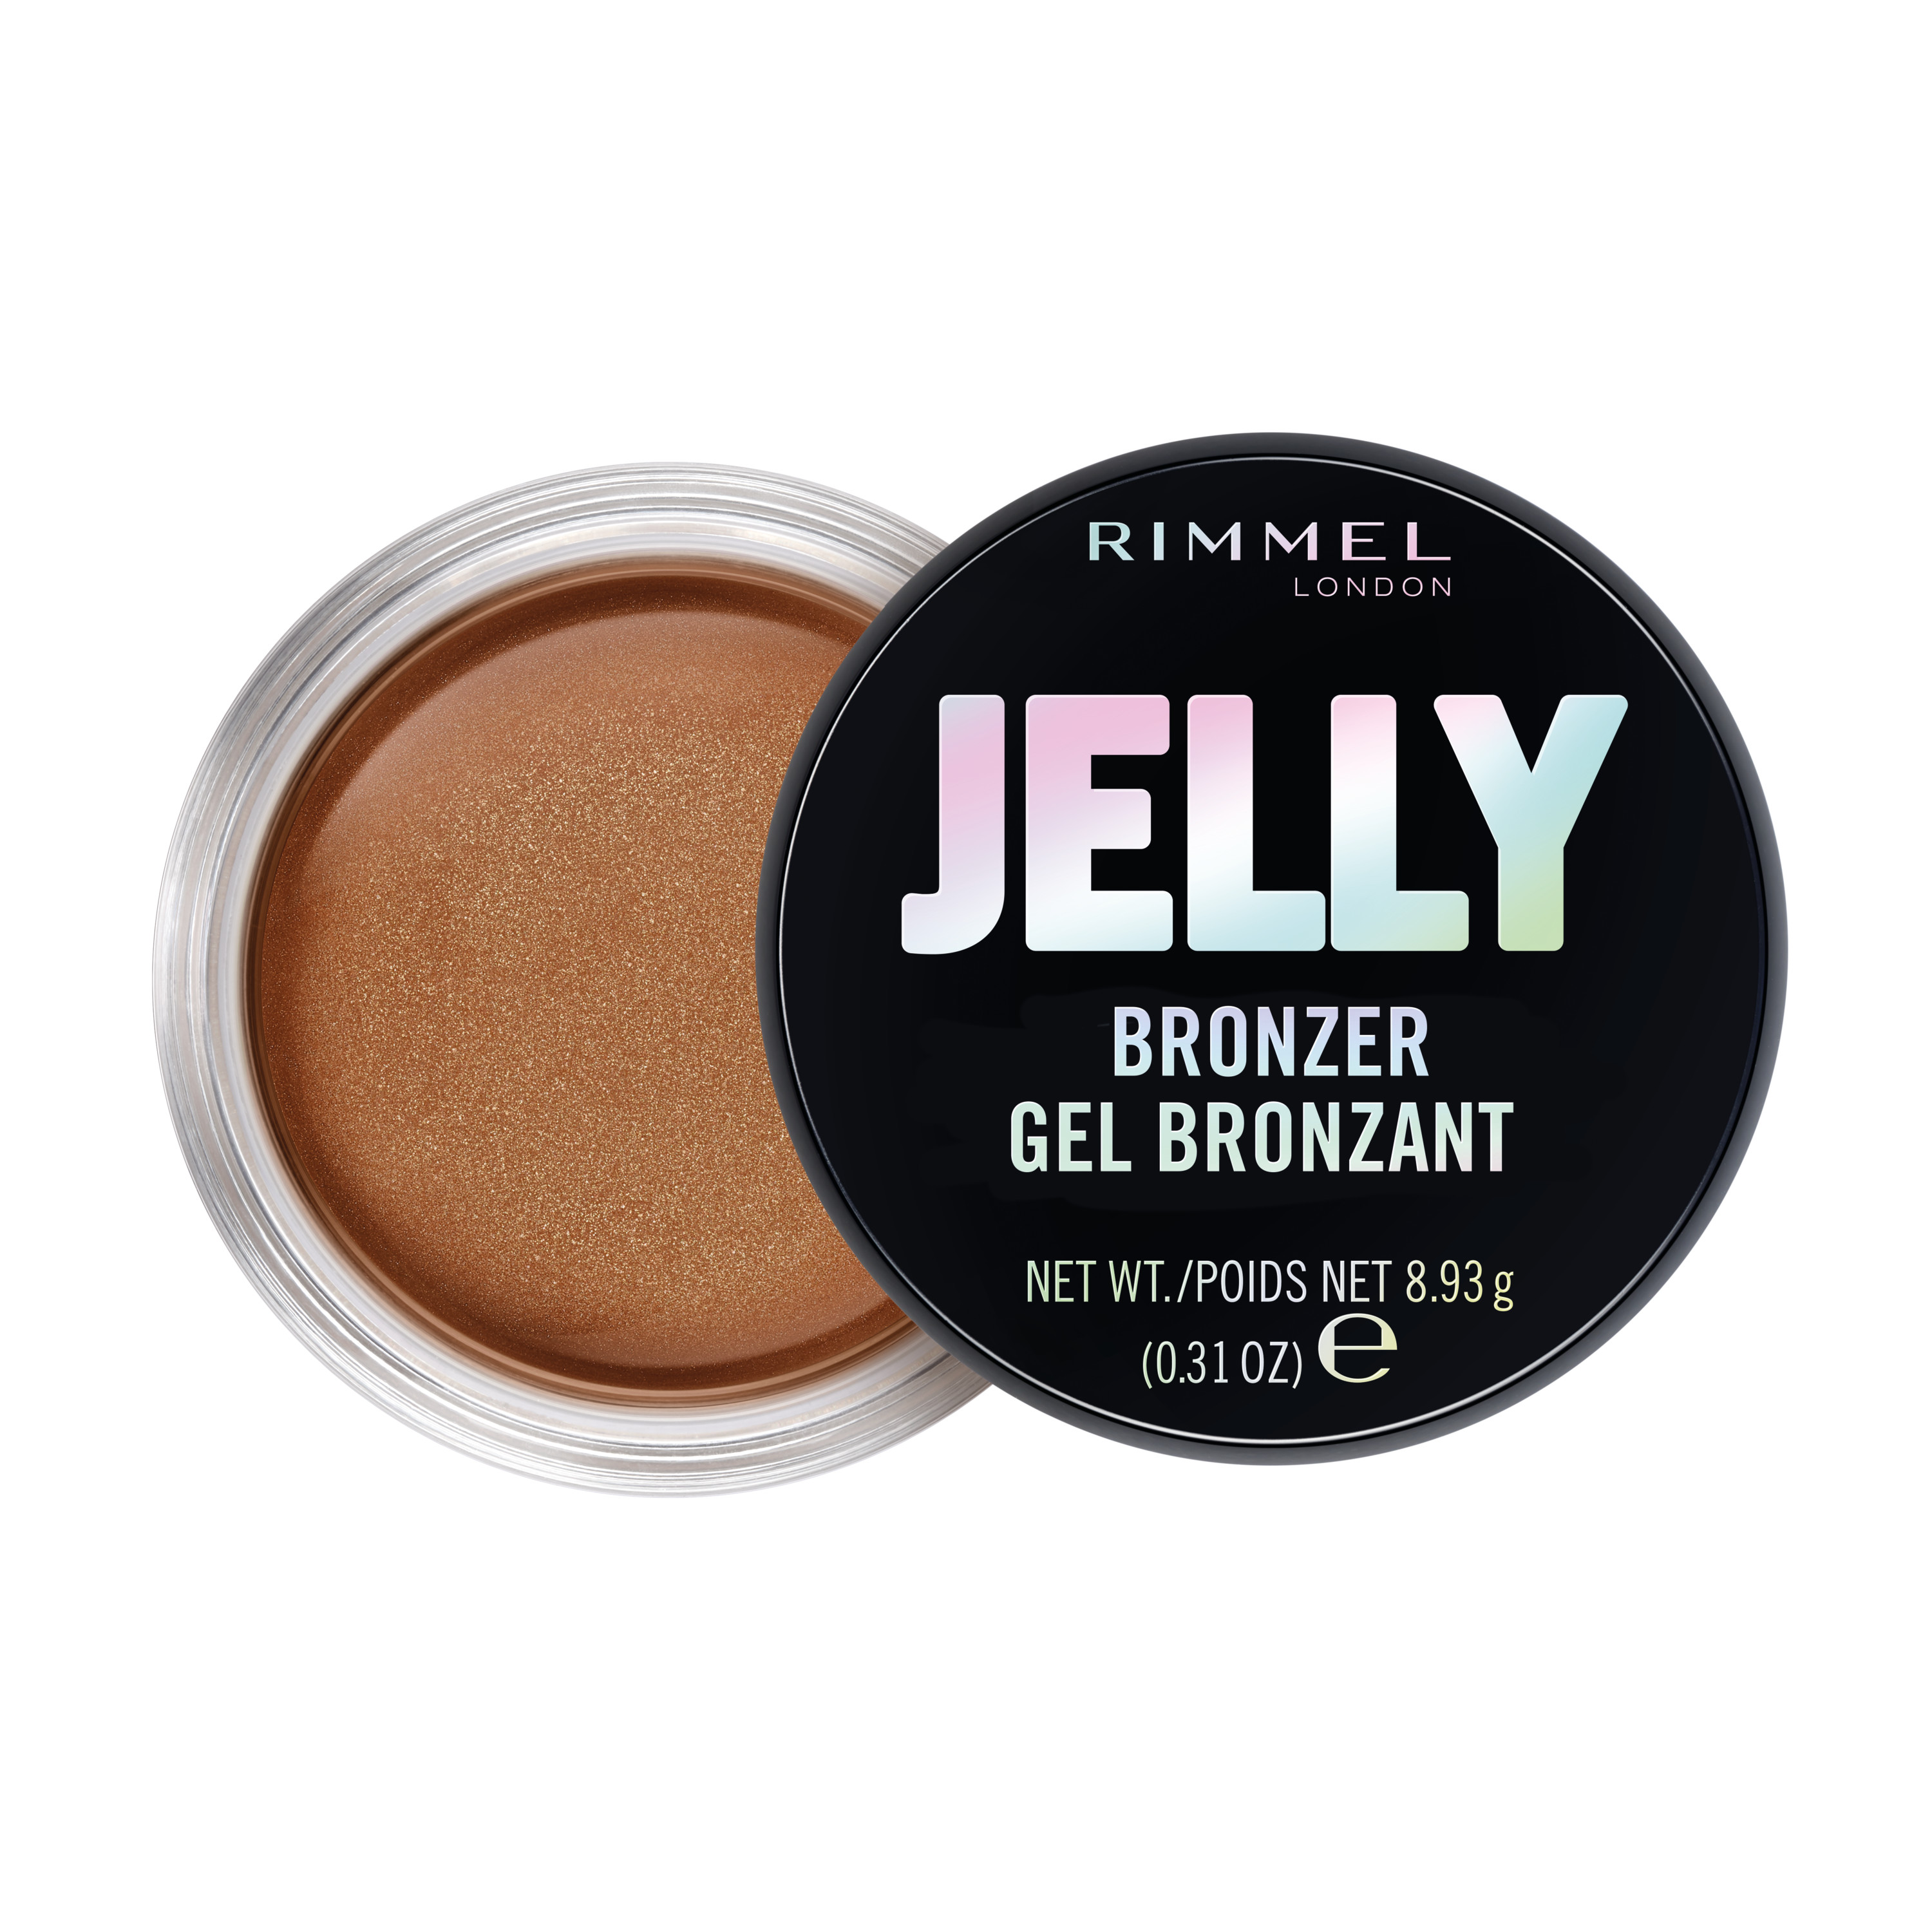 Rimmel Jelly Bronzer, 002 Golden Touch, 0.31 oz - image 1 of 5